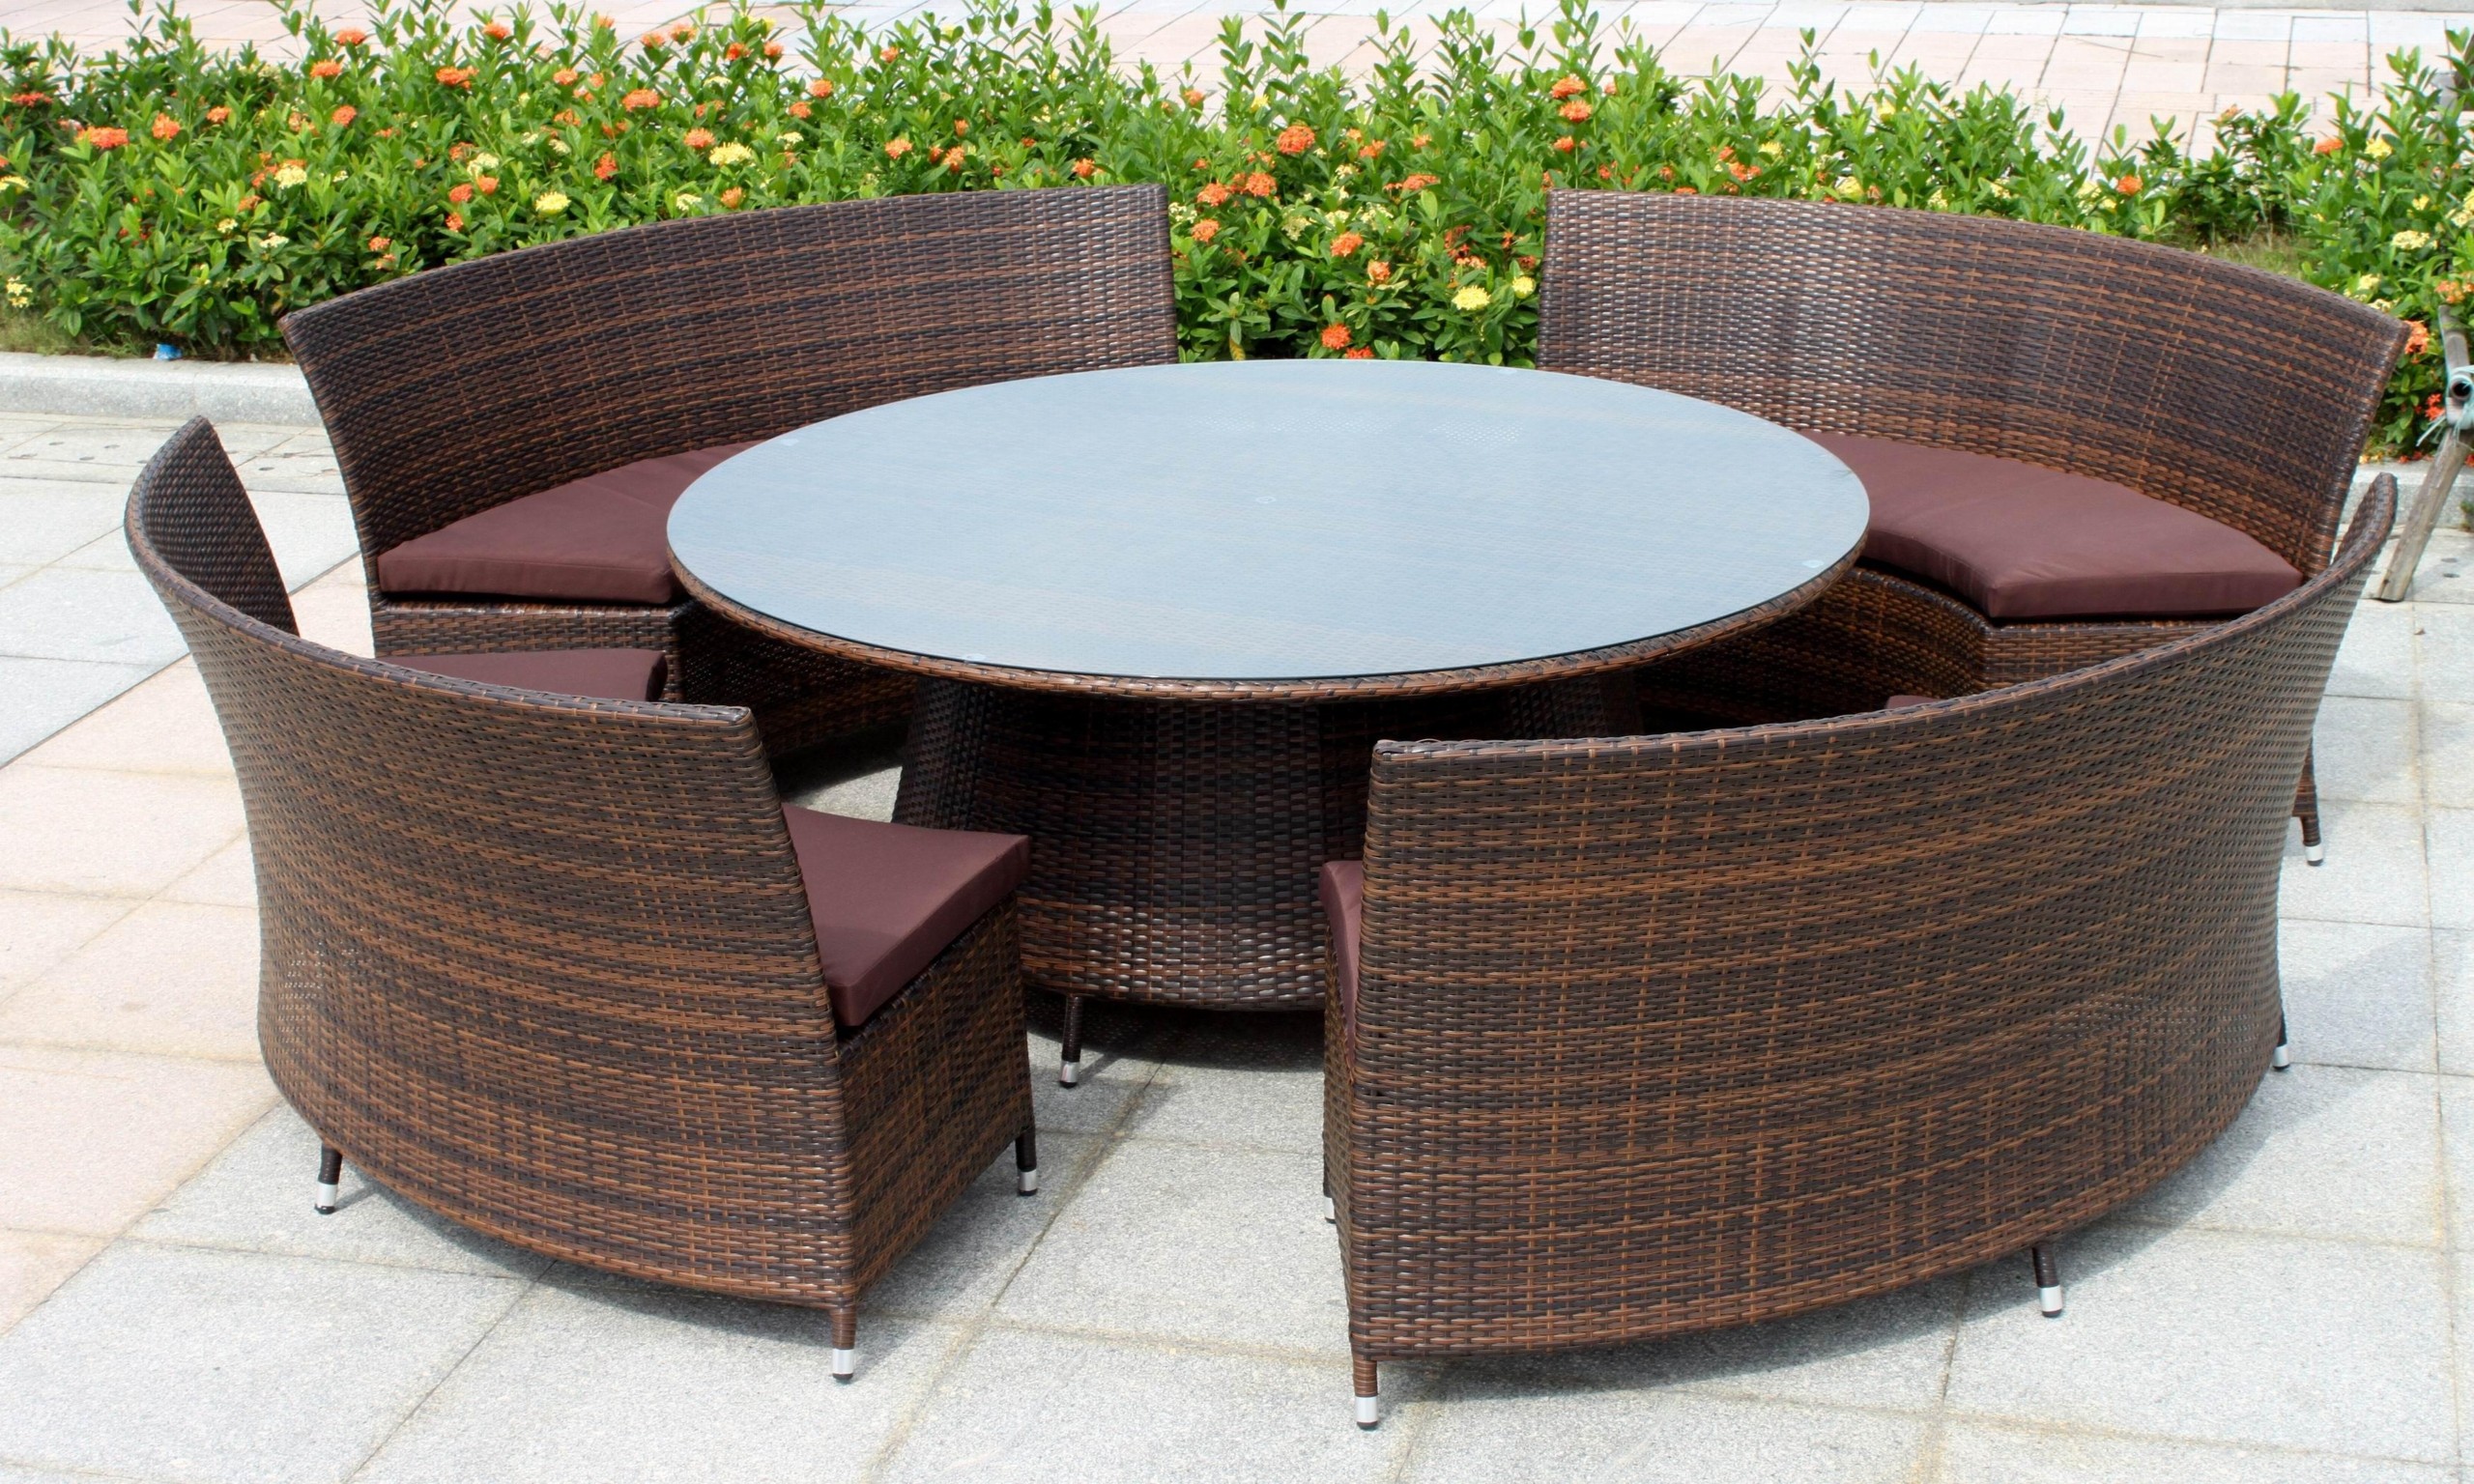 Large round outdoor dining table